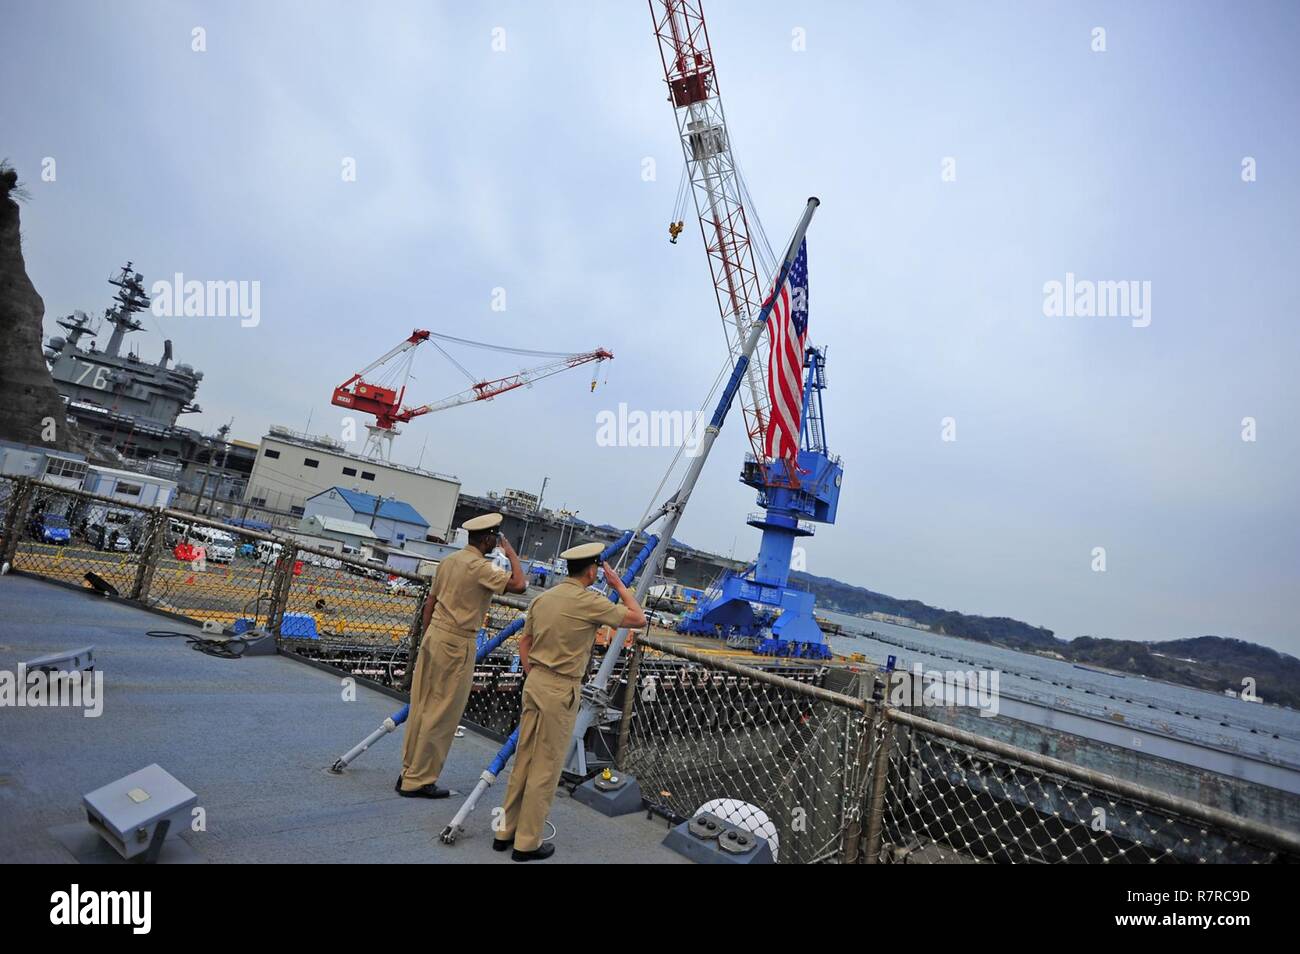 YOKOSUKA, Japan (March 31, 2017) - Senior Chief Hospital Corpsman Michael Jimenez, left, and Chief Electrician's Mate Willie Scott II, both attached to the U.S. 7th Fleet flagship USS Blue Ridge (LCC 19), perform morning colors in honor of fallen chiefs the day prior to the chief petty officers' 124th birthday. The rank of chief petty officer was officially established on April 1, 1893. Blue Ridge is in an extensive maintenance period in order to modernize the ship to continue to serve as a robust communications platform in the U.S. 7th Fleet area of operations. Stock Photo